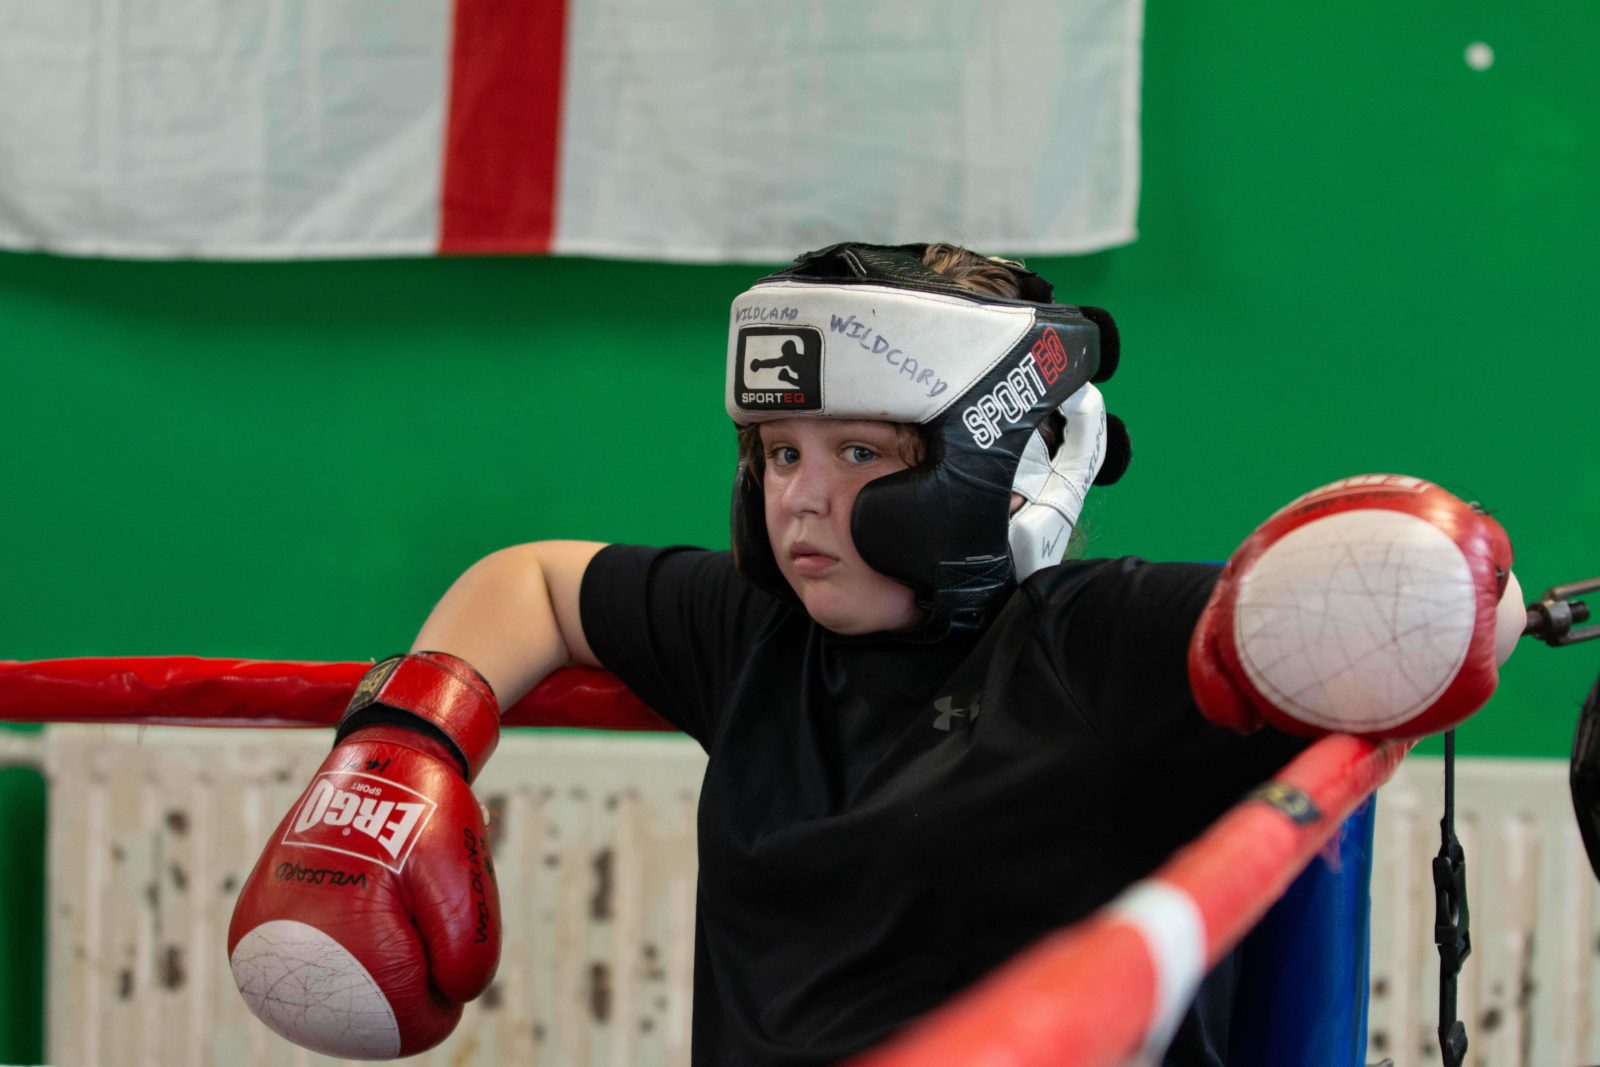 A young person leans against the inside corner of a boxing ring. They are wearing a black and white headguards and red and white boxing gloves.